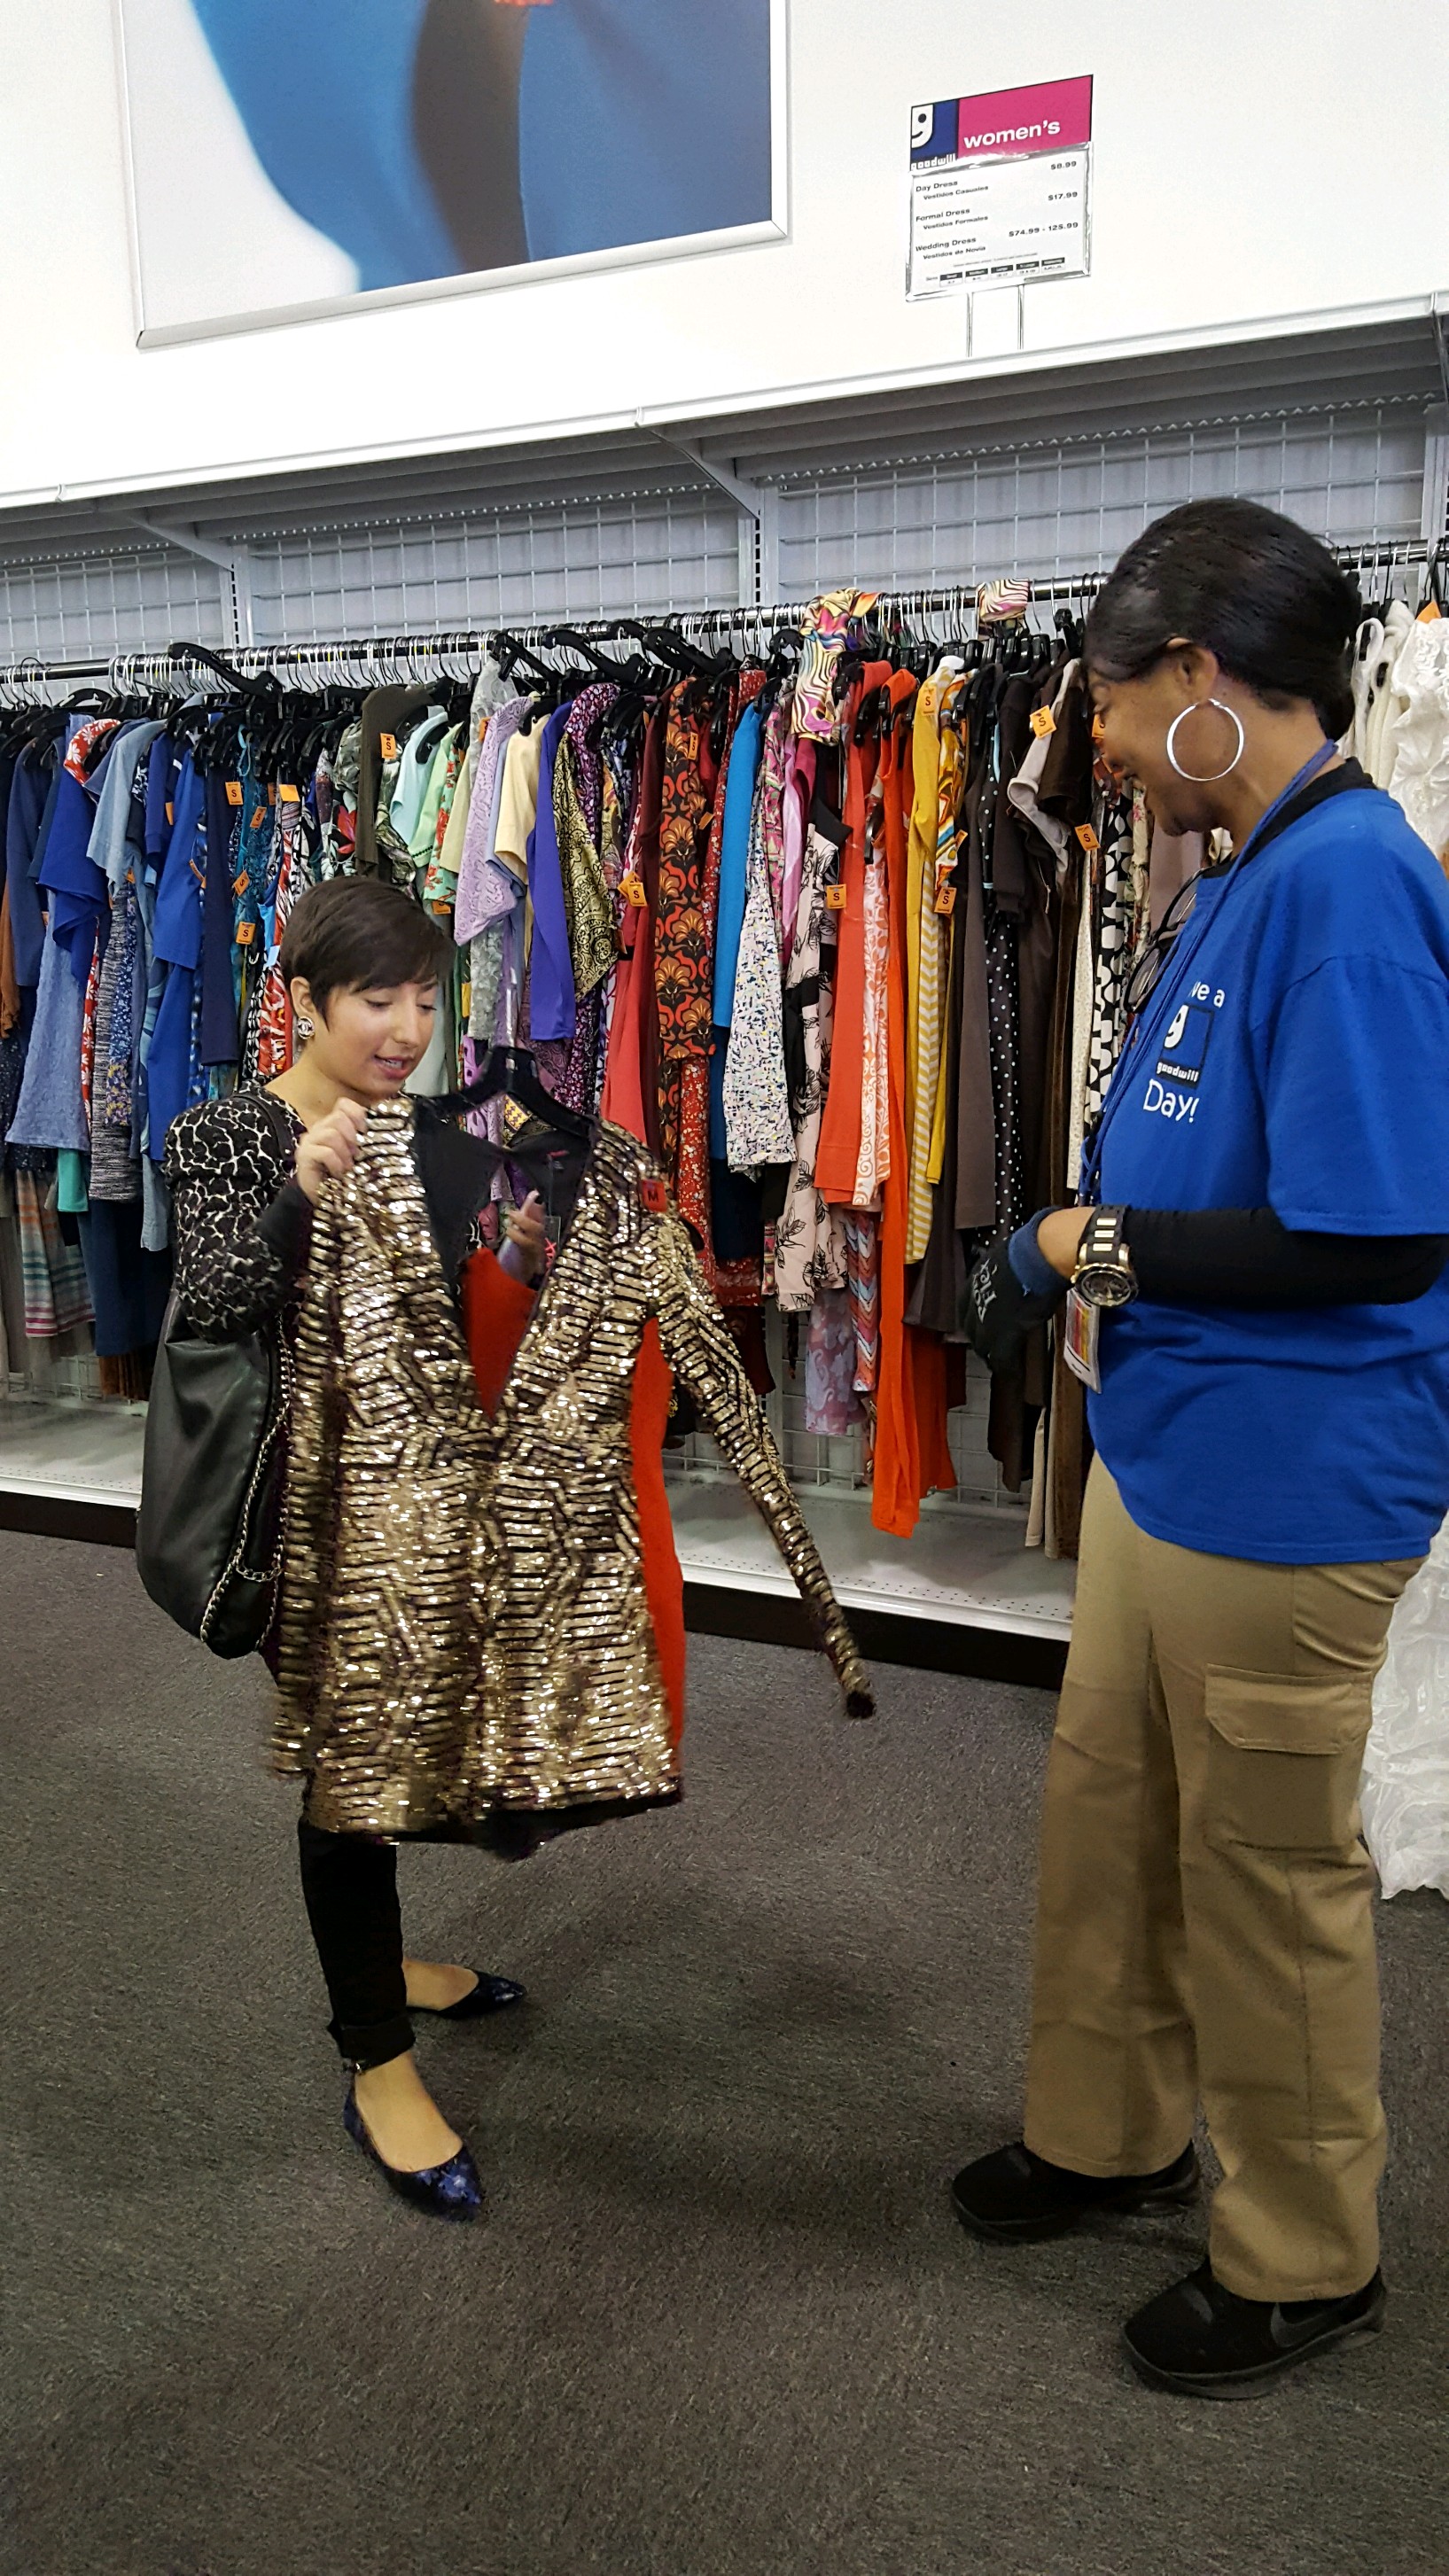 Goodwill employee picks out dress for fashionista